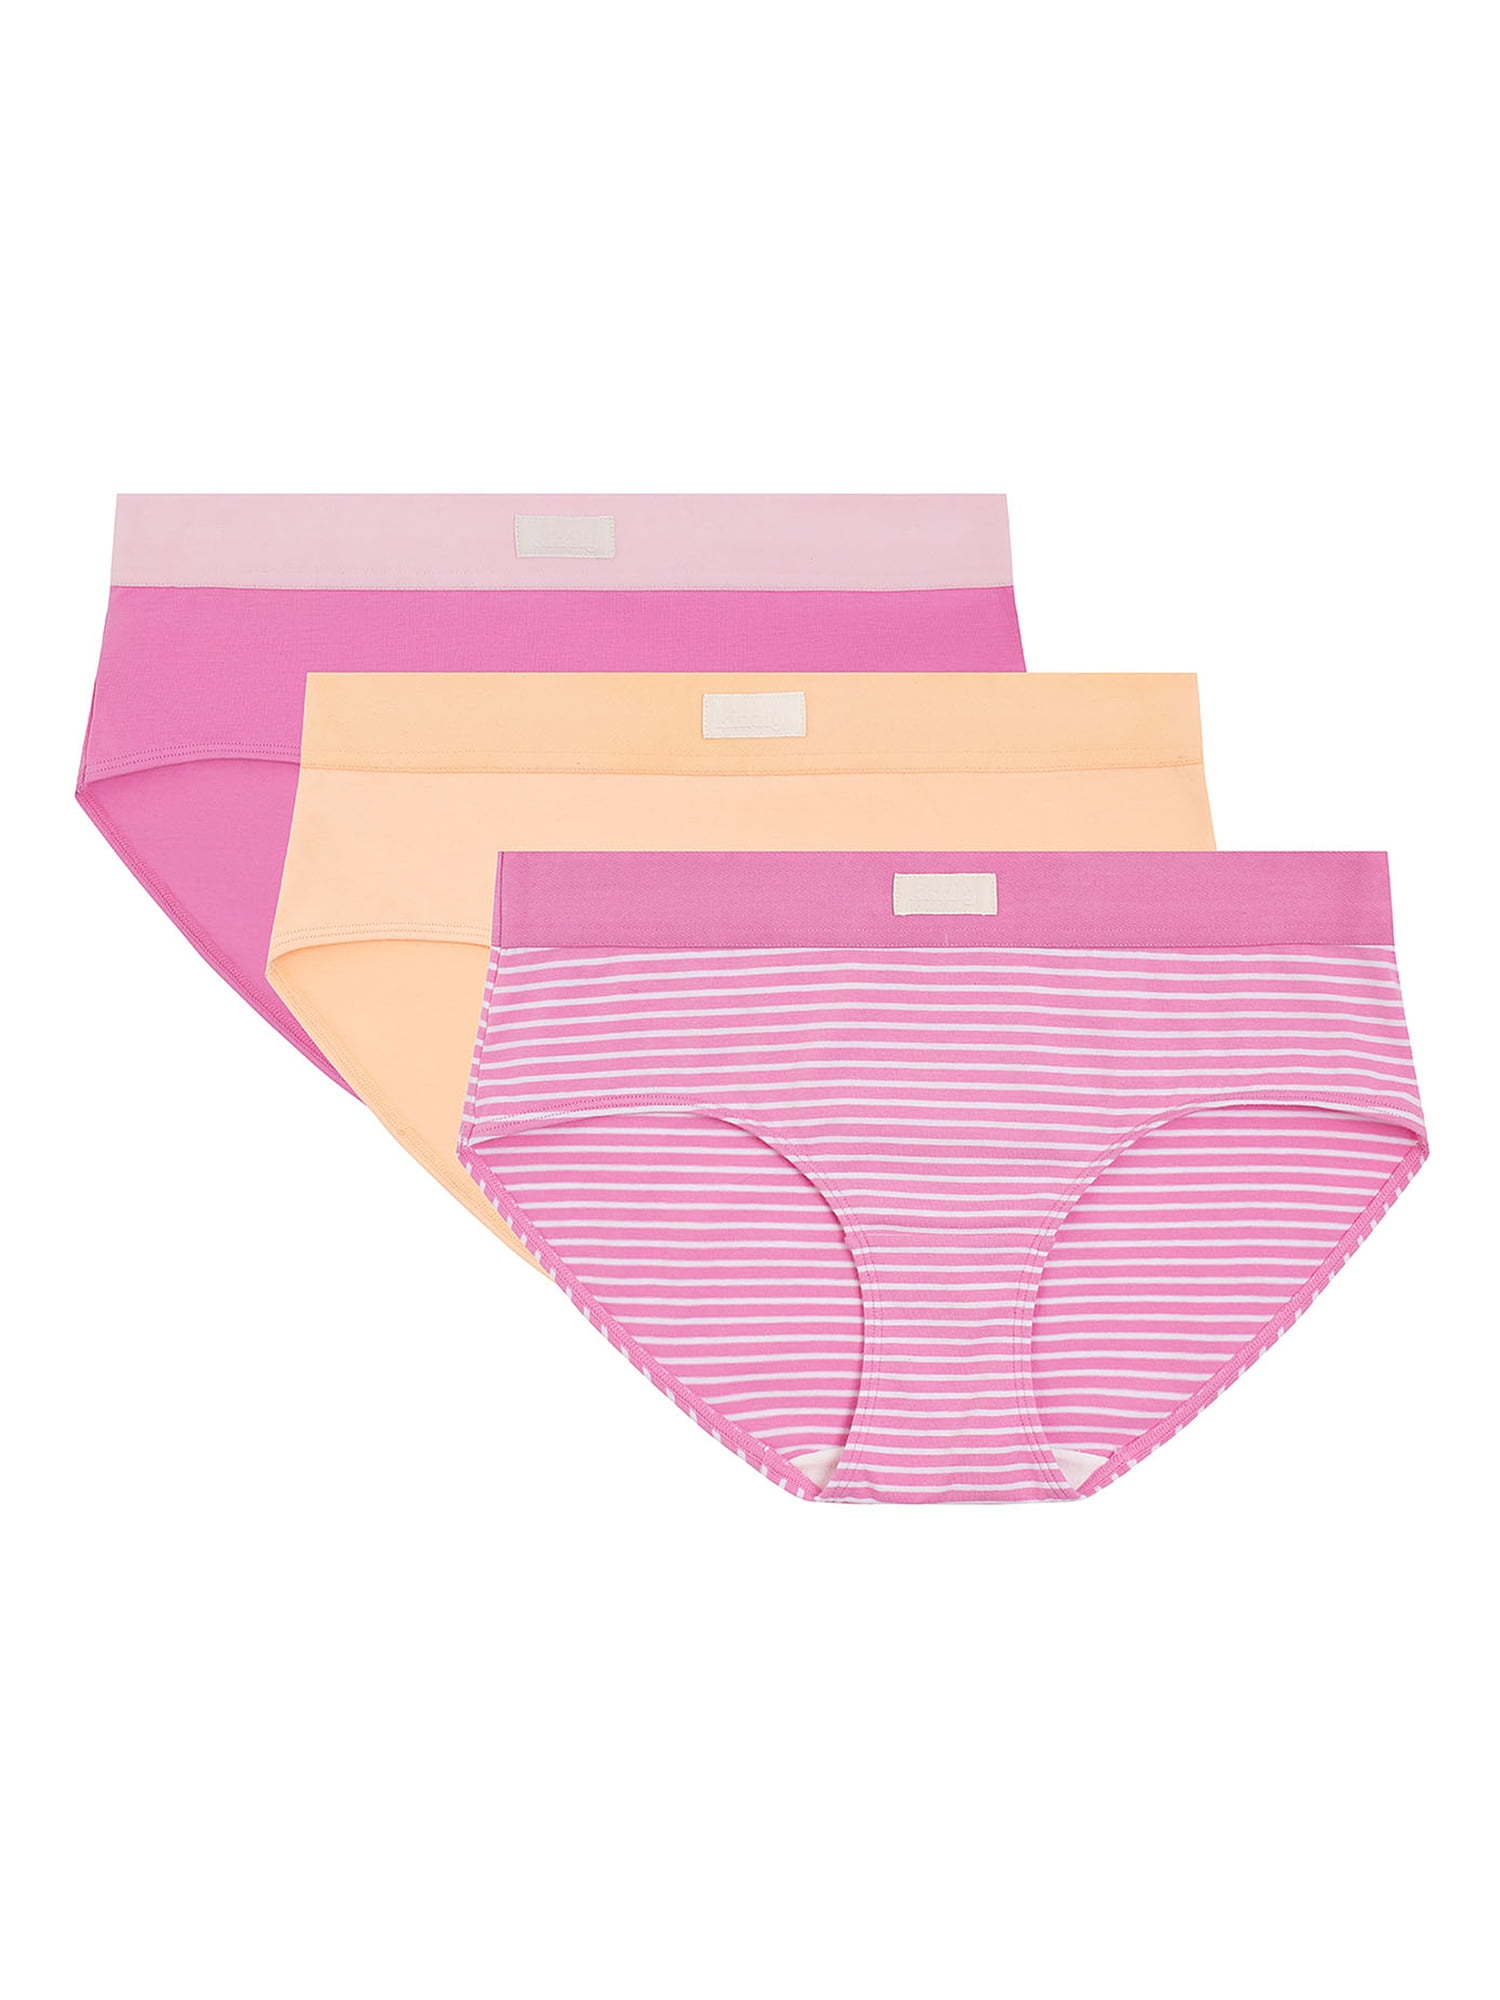 Kindly Yours Women's Cotton Hipster Panties, 3-Pack 